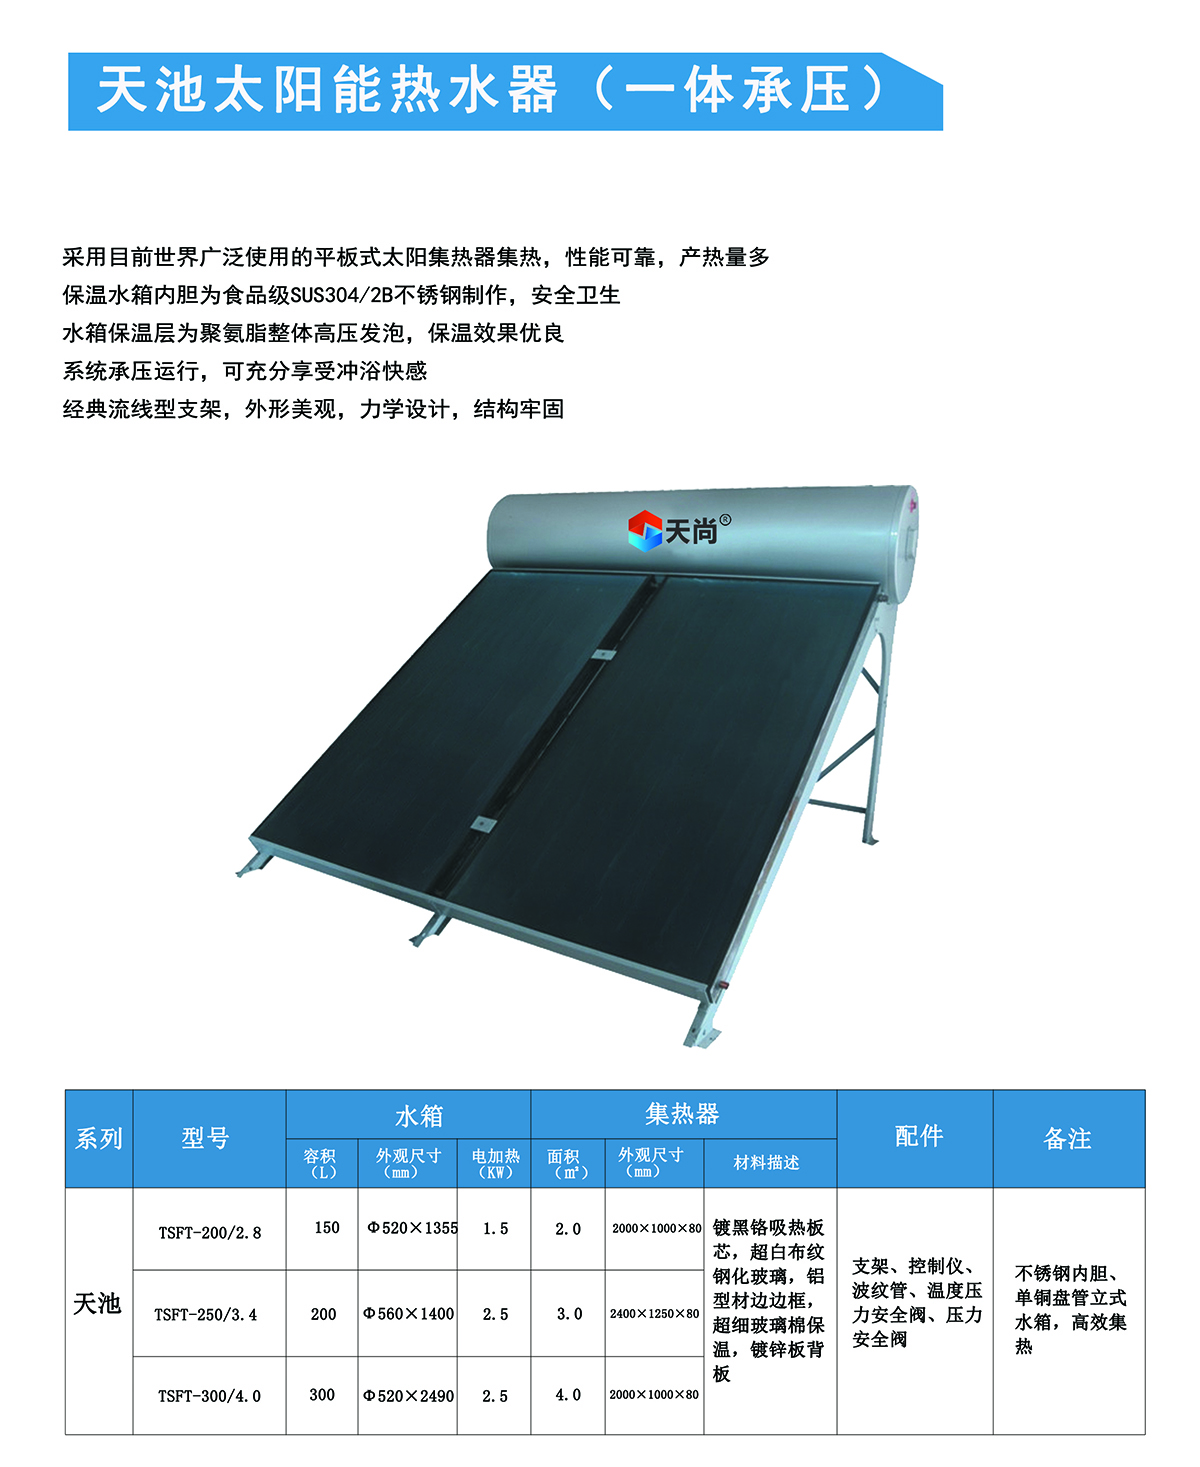 Tianchi solar water heater (integrated pressure bearing)